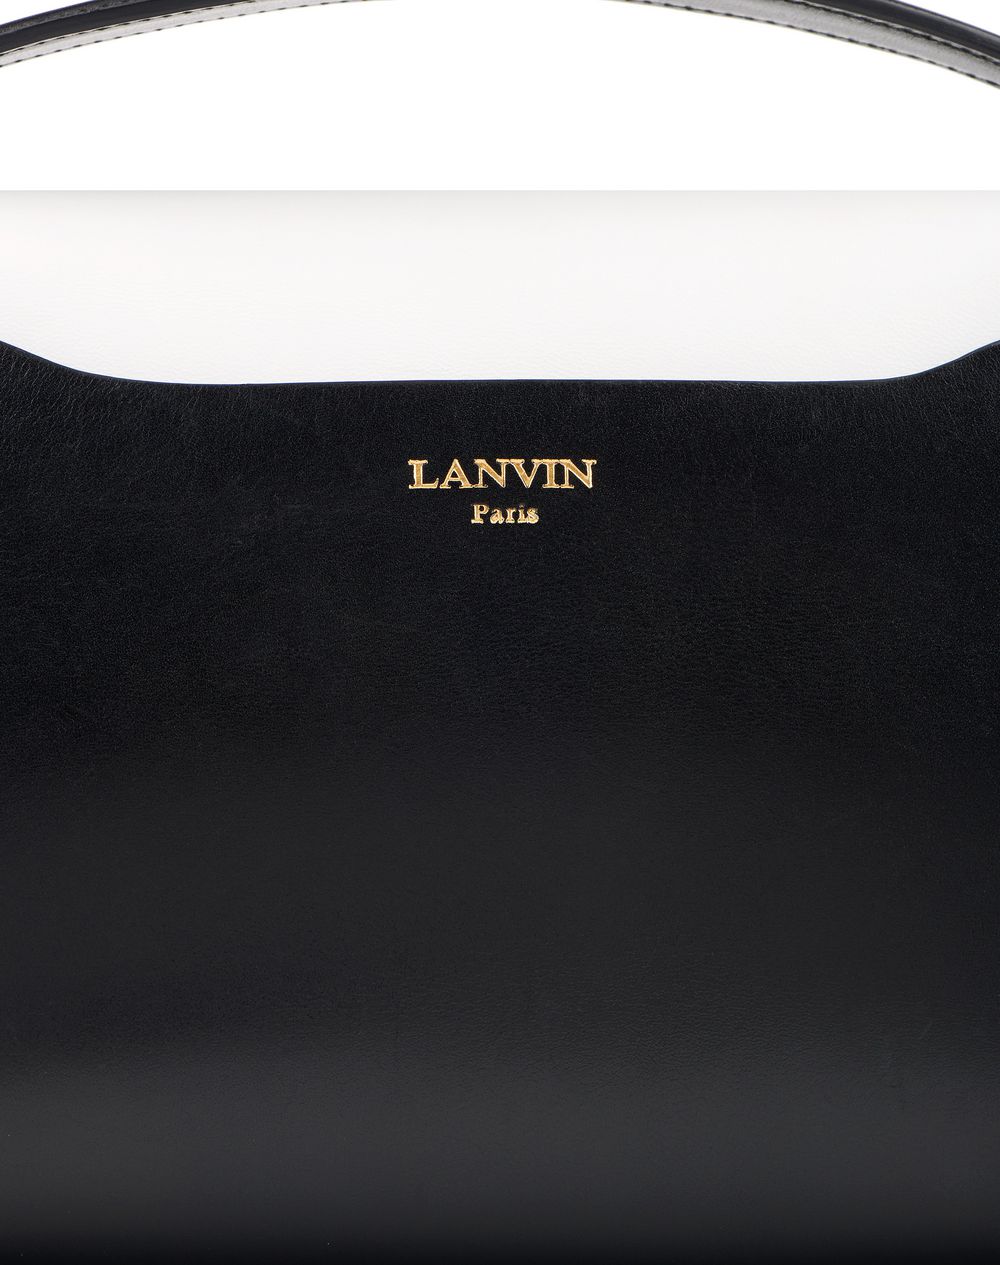 flap and gem closure, leather plaque embossed with lanvin logo